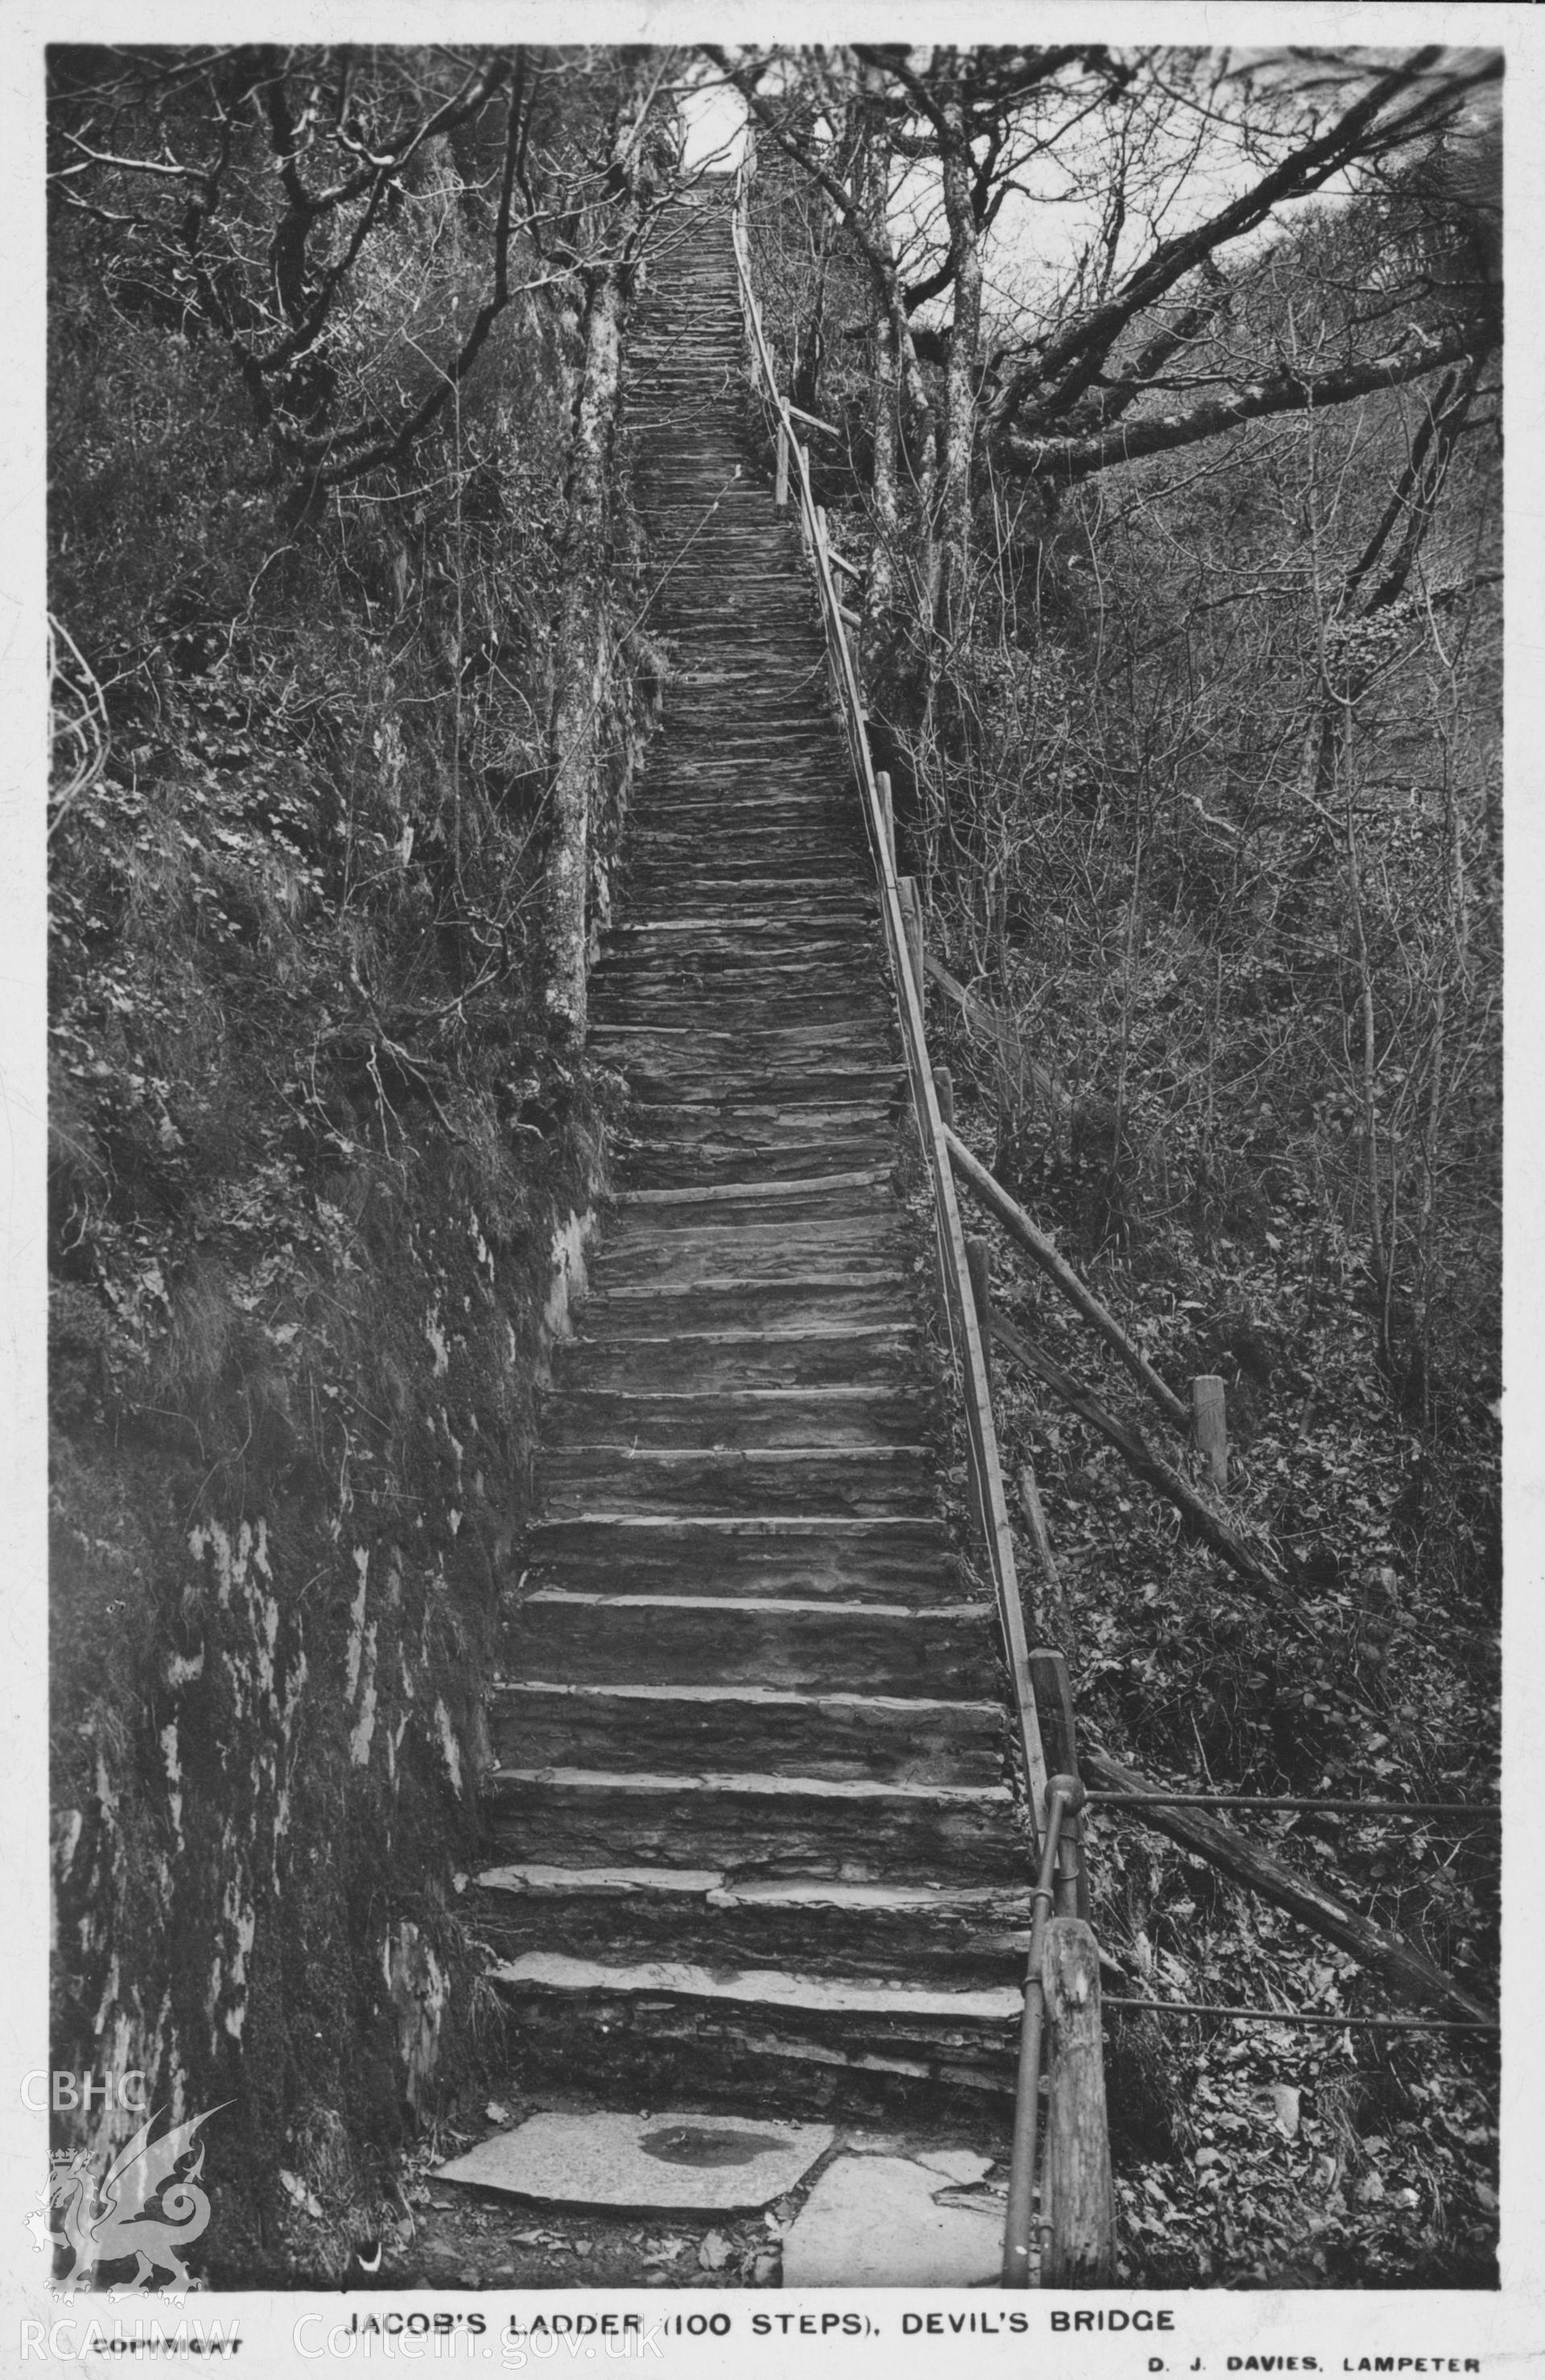 Digital copy of postcard showing Jacob's Ladder (100 steps), Devil's Bridge, dated 1938.  Loaned for copying by Charlie Downes.